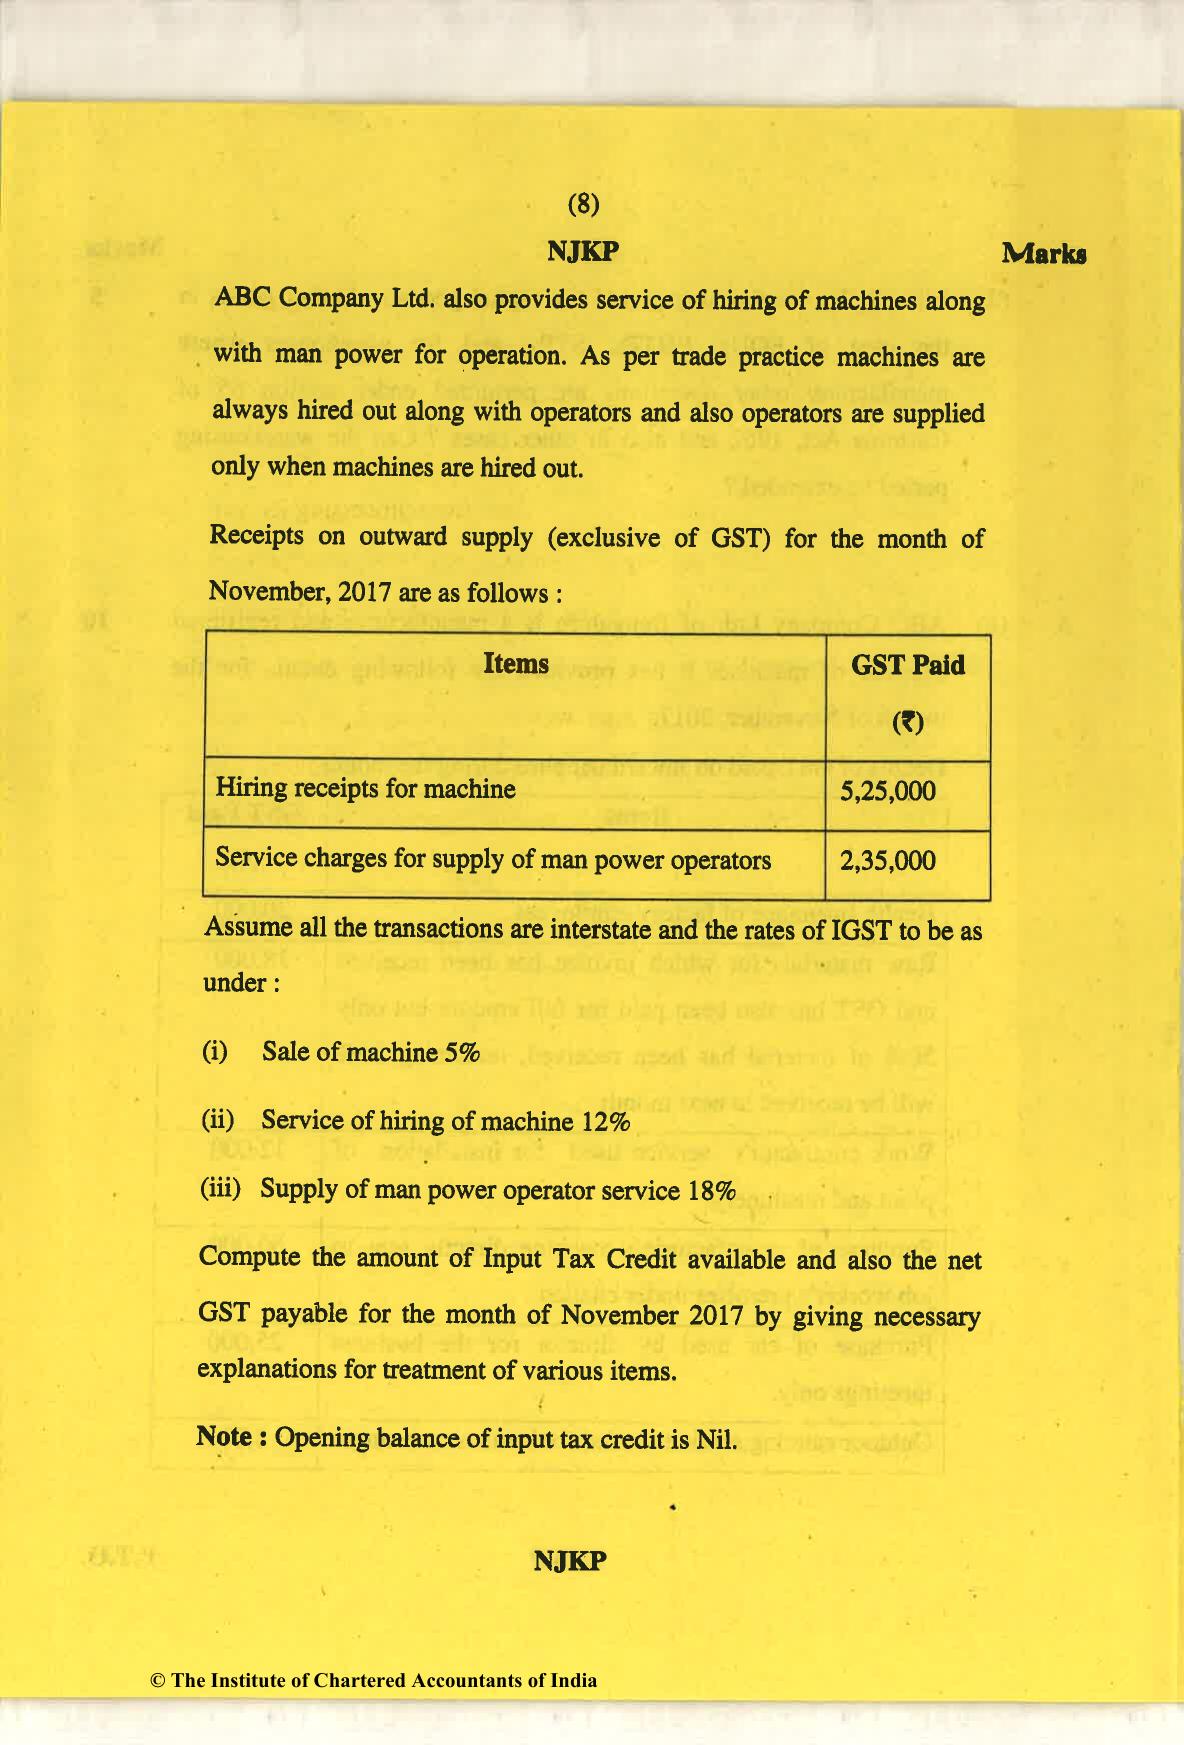 CA Final May 2018 Question Paper - Paper 8 – Indirect Tax Laws - Page 8